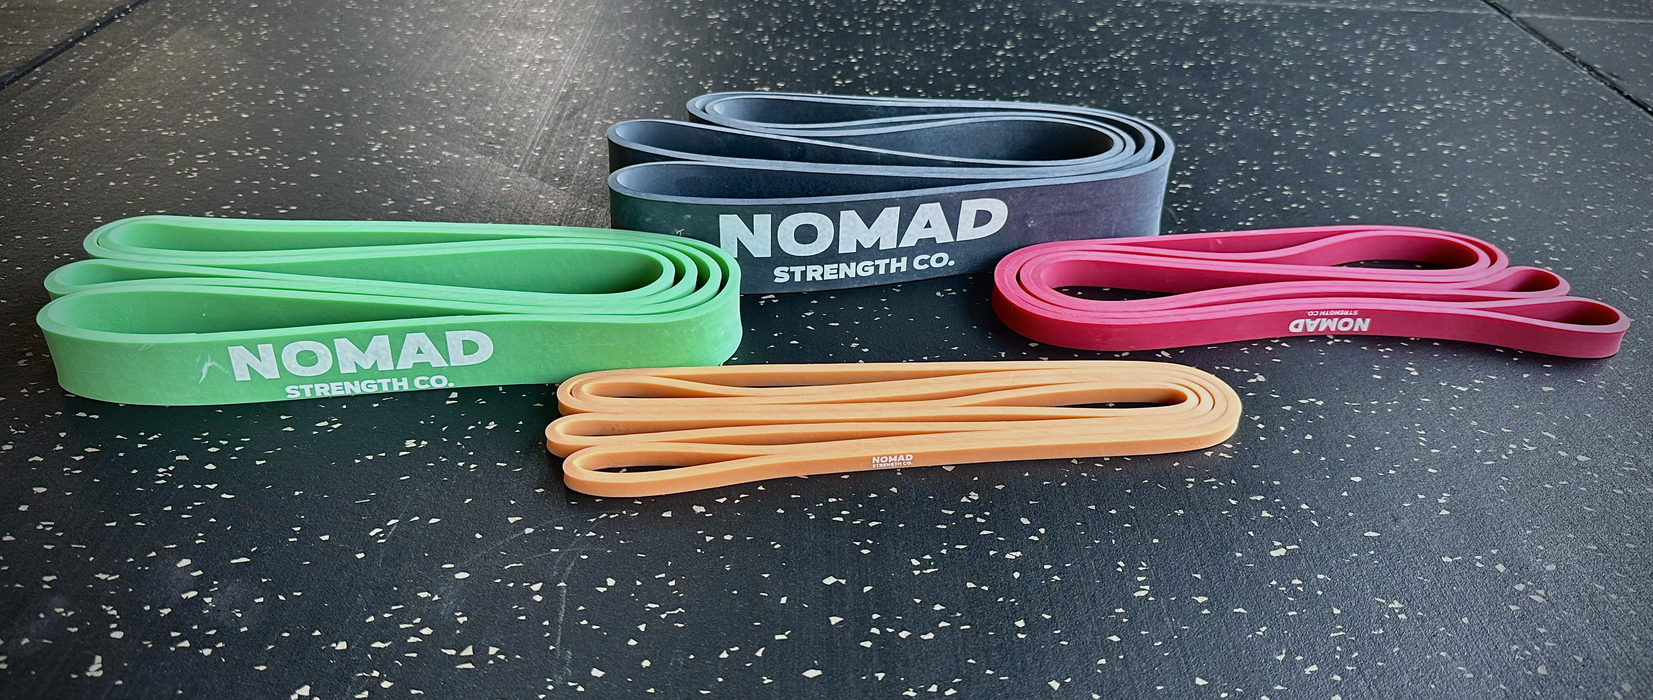 Nomad Power Bands